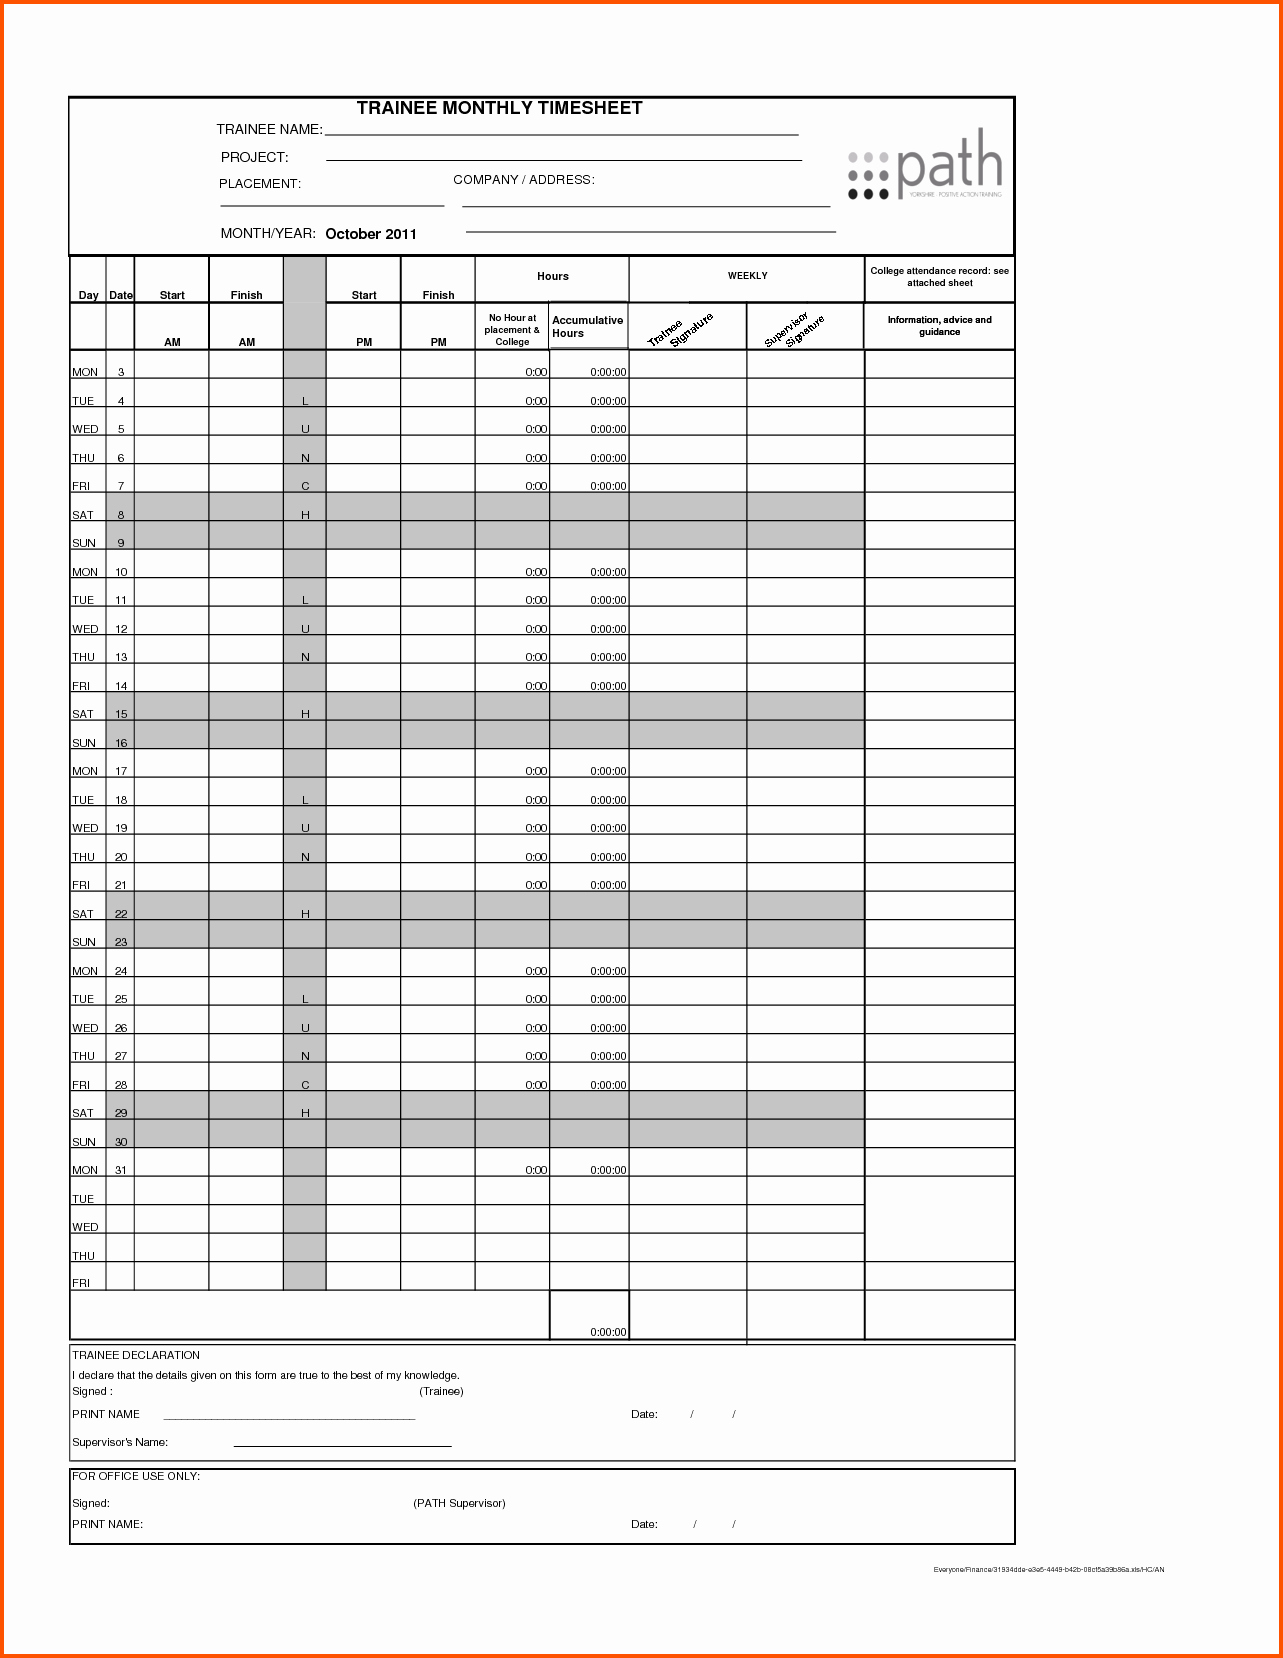 Aa Sign In Sheet Best Of Aa Sign In Sheet Template Uirunisaza Web Fc2